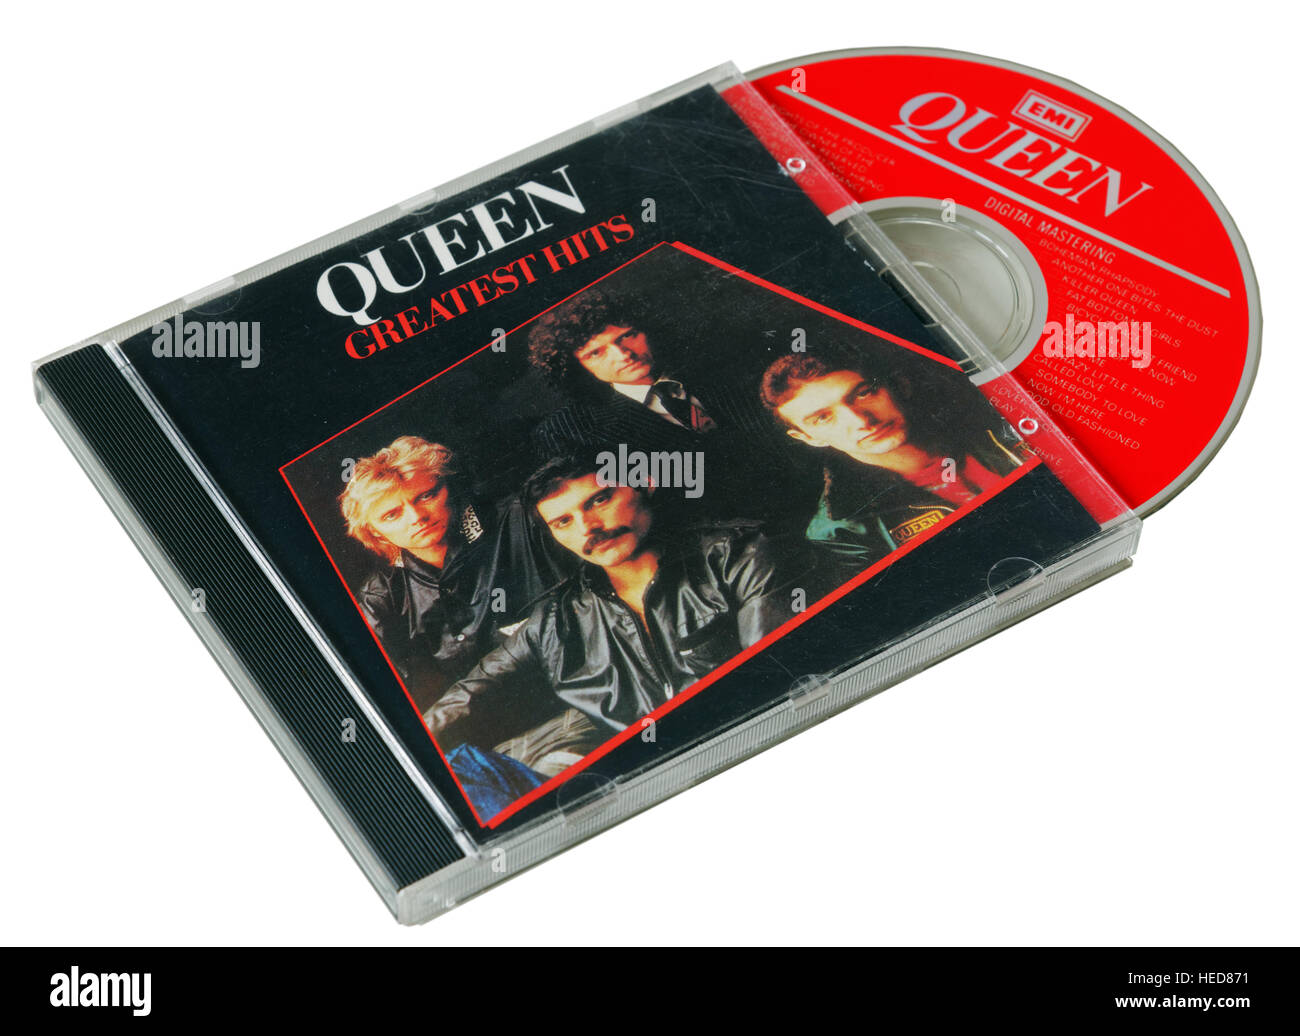 Queen Greatest Hits CD Stock Photo